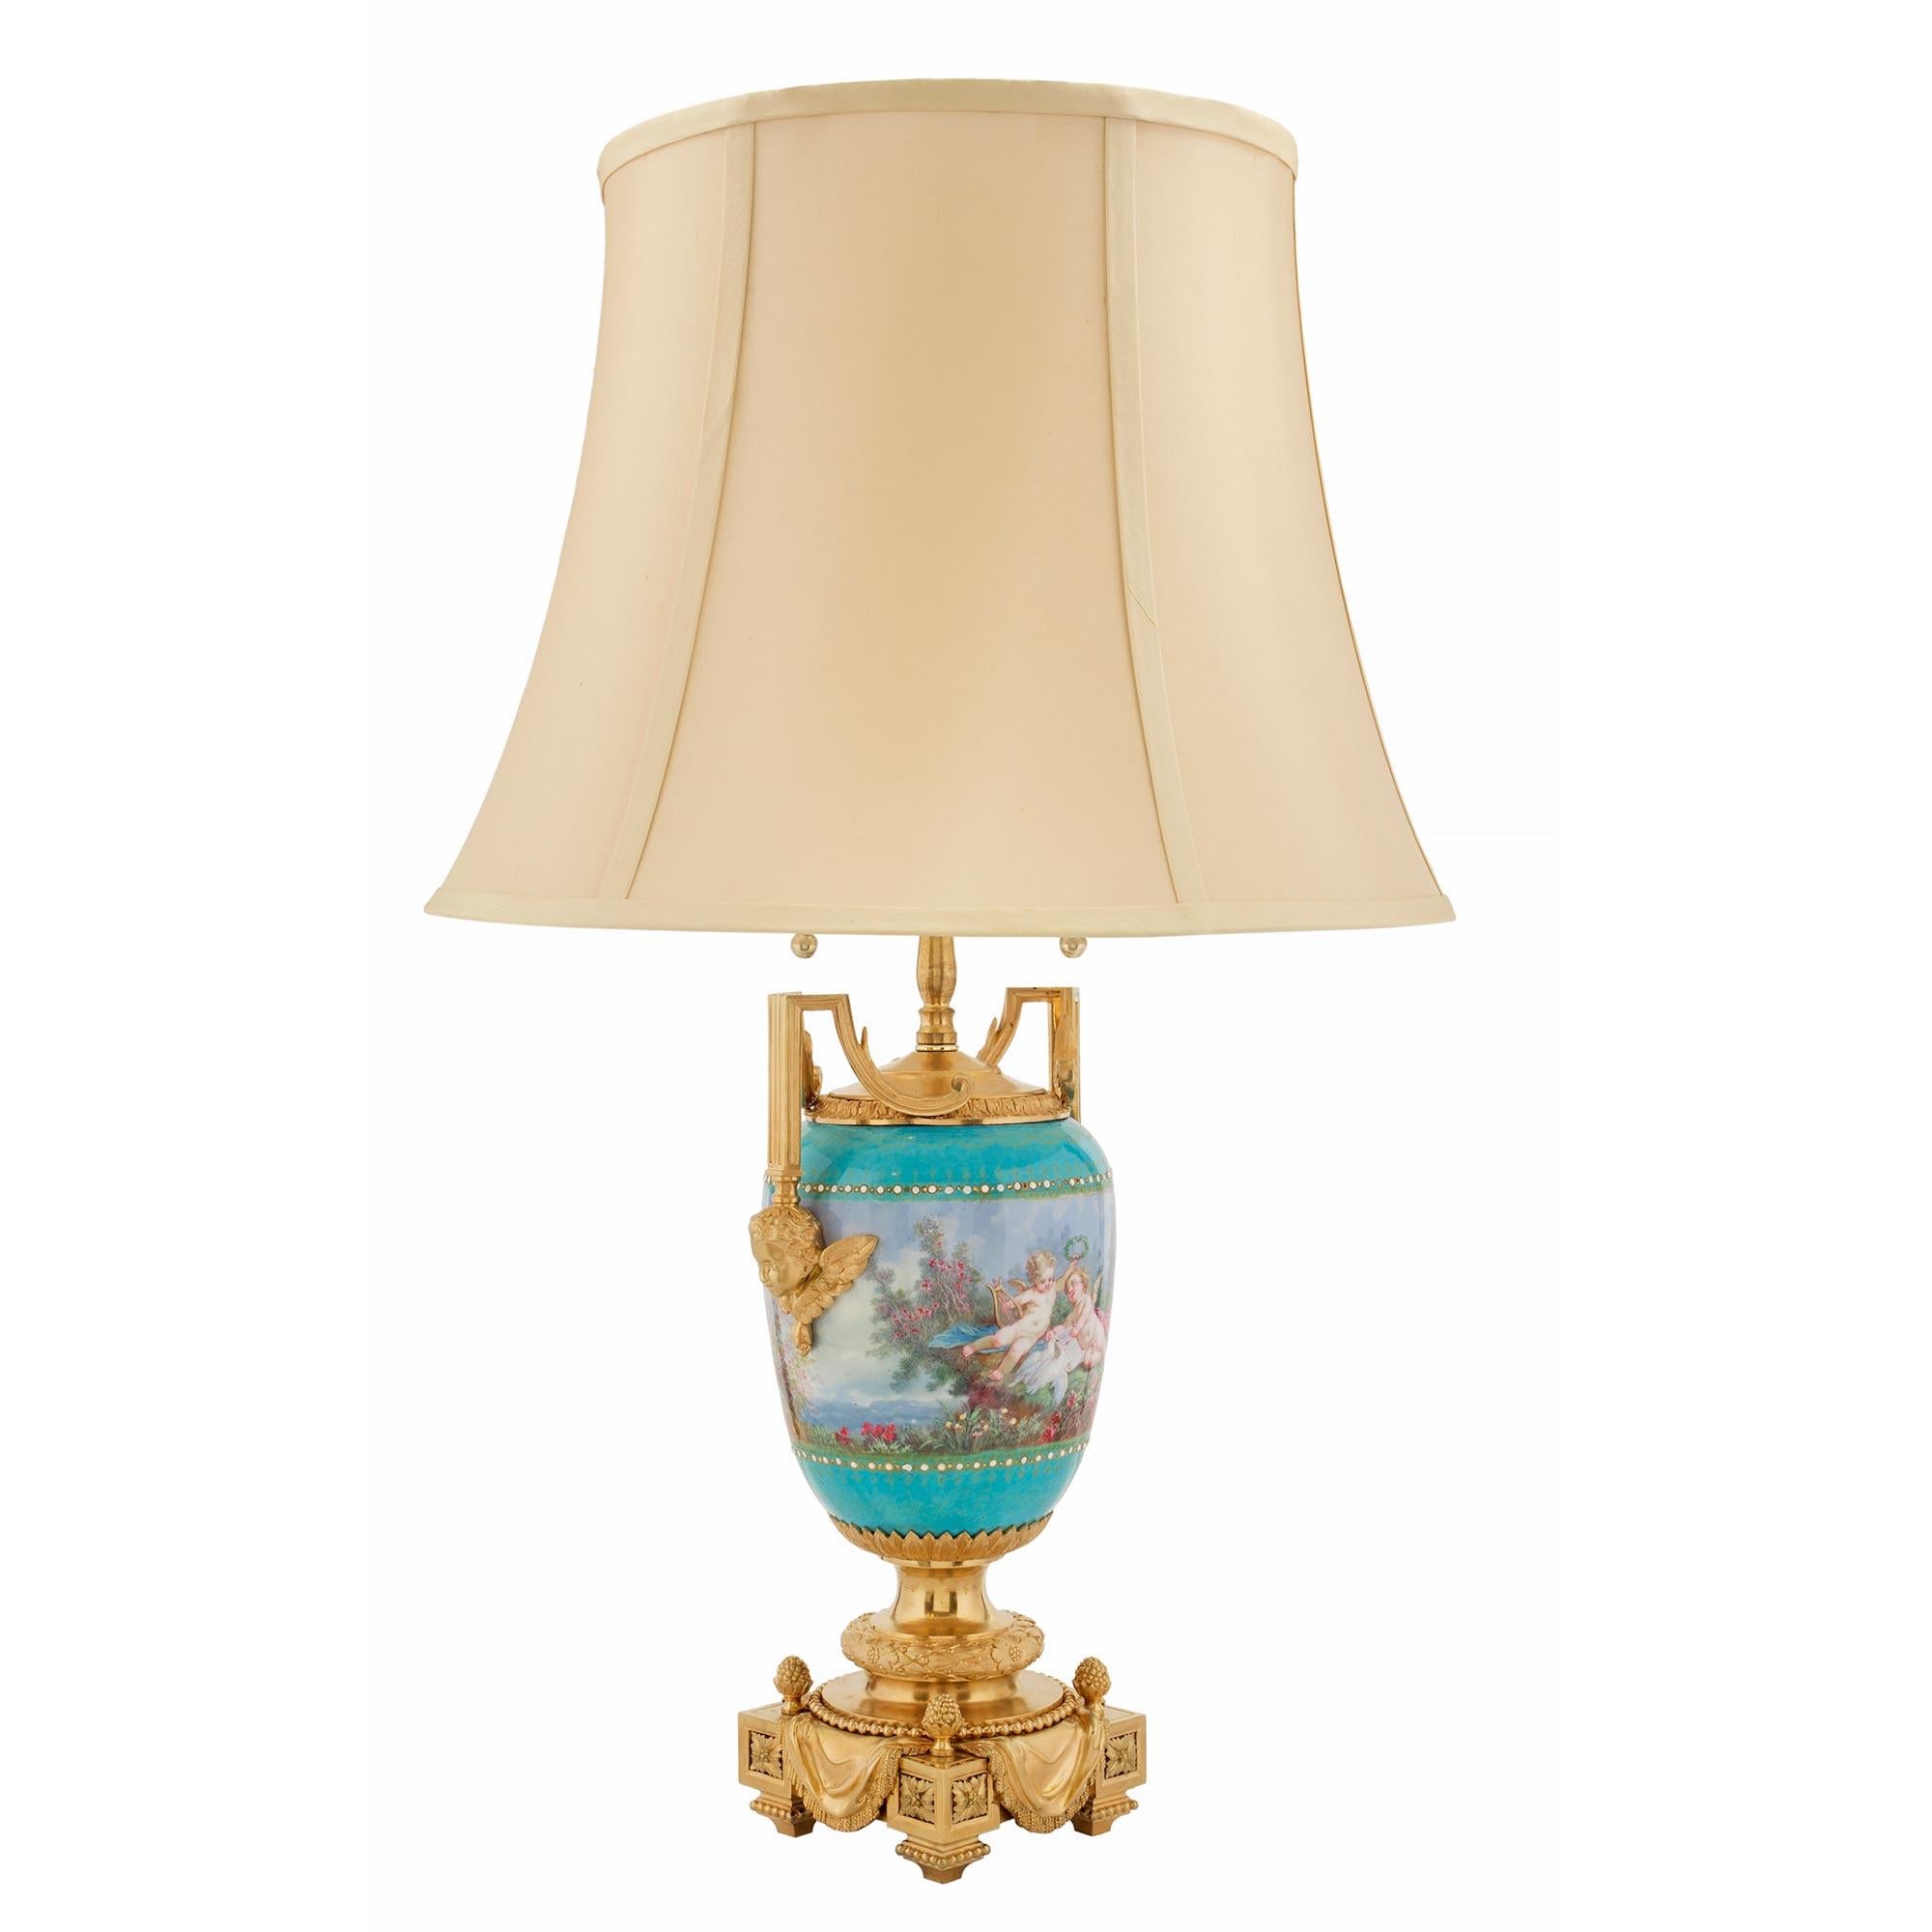 A stunning pair of French 19th century Louis XVI st. ormolu and enameled porcelain lamps hand signed by Picard. Each lamp is raised by a striking and richly detailed ormolu base with block rosettes, a wonderfully executed draped fabric with tassels